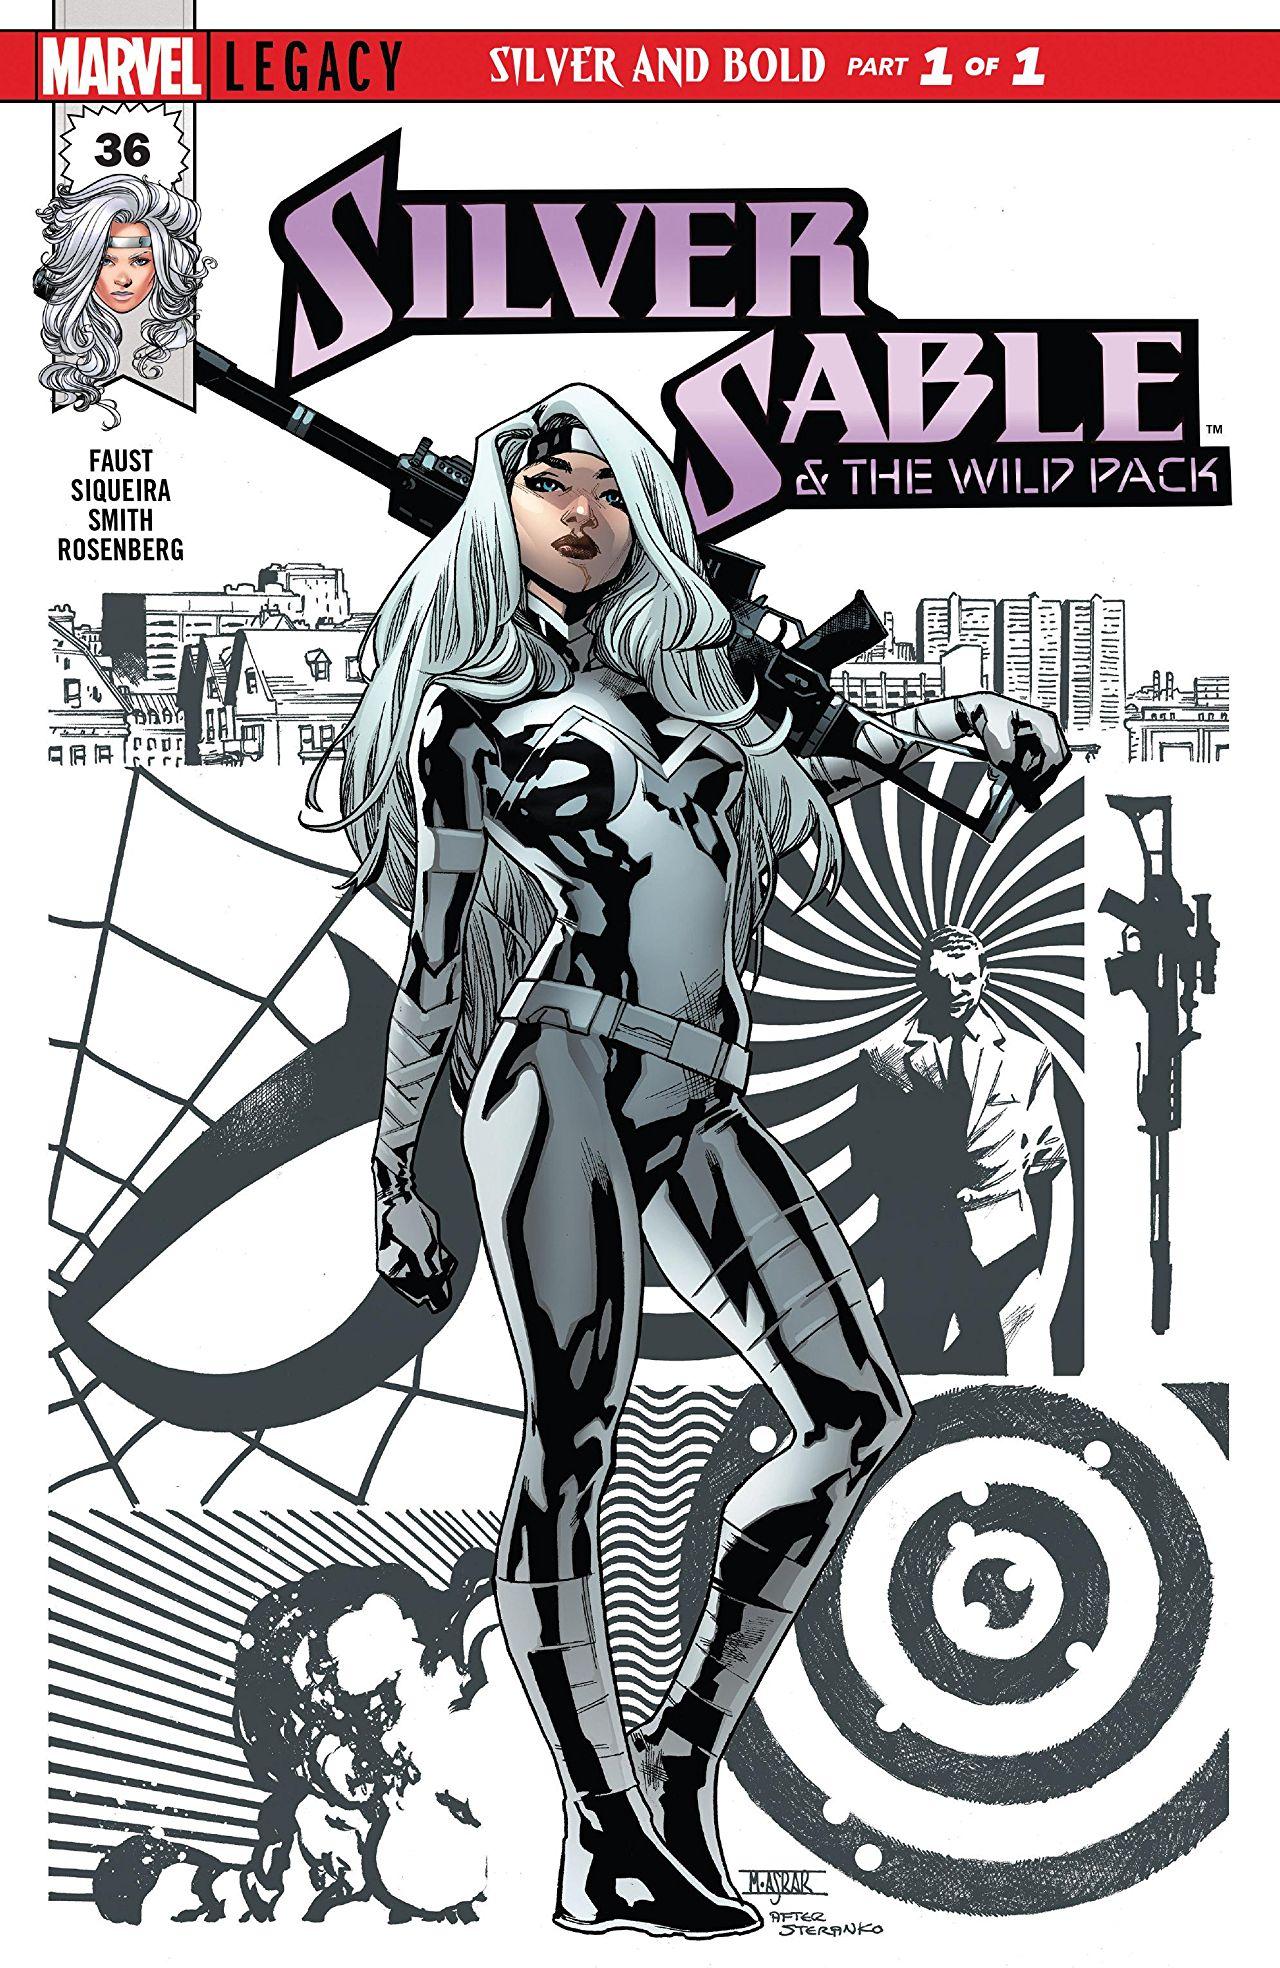 Silver Sable and the Wild Pack Vol. 1 #36